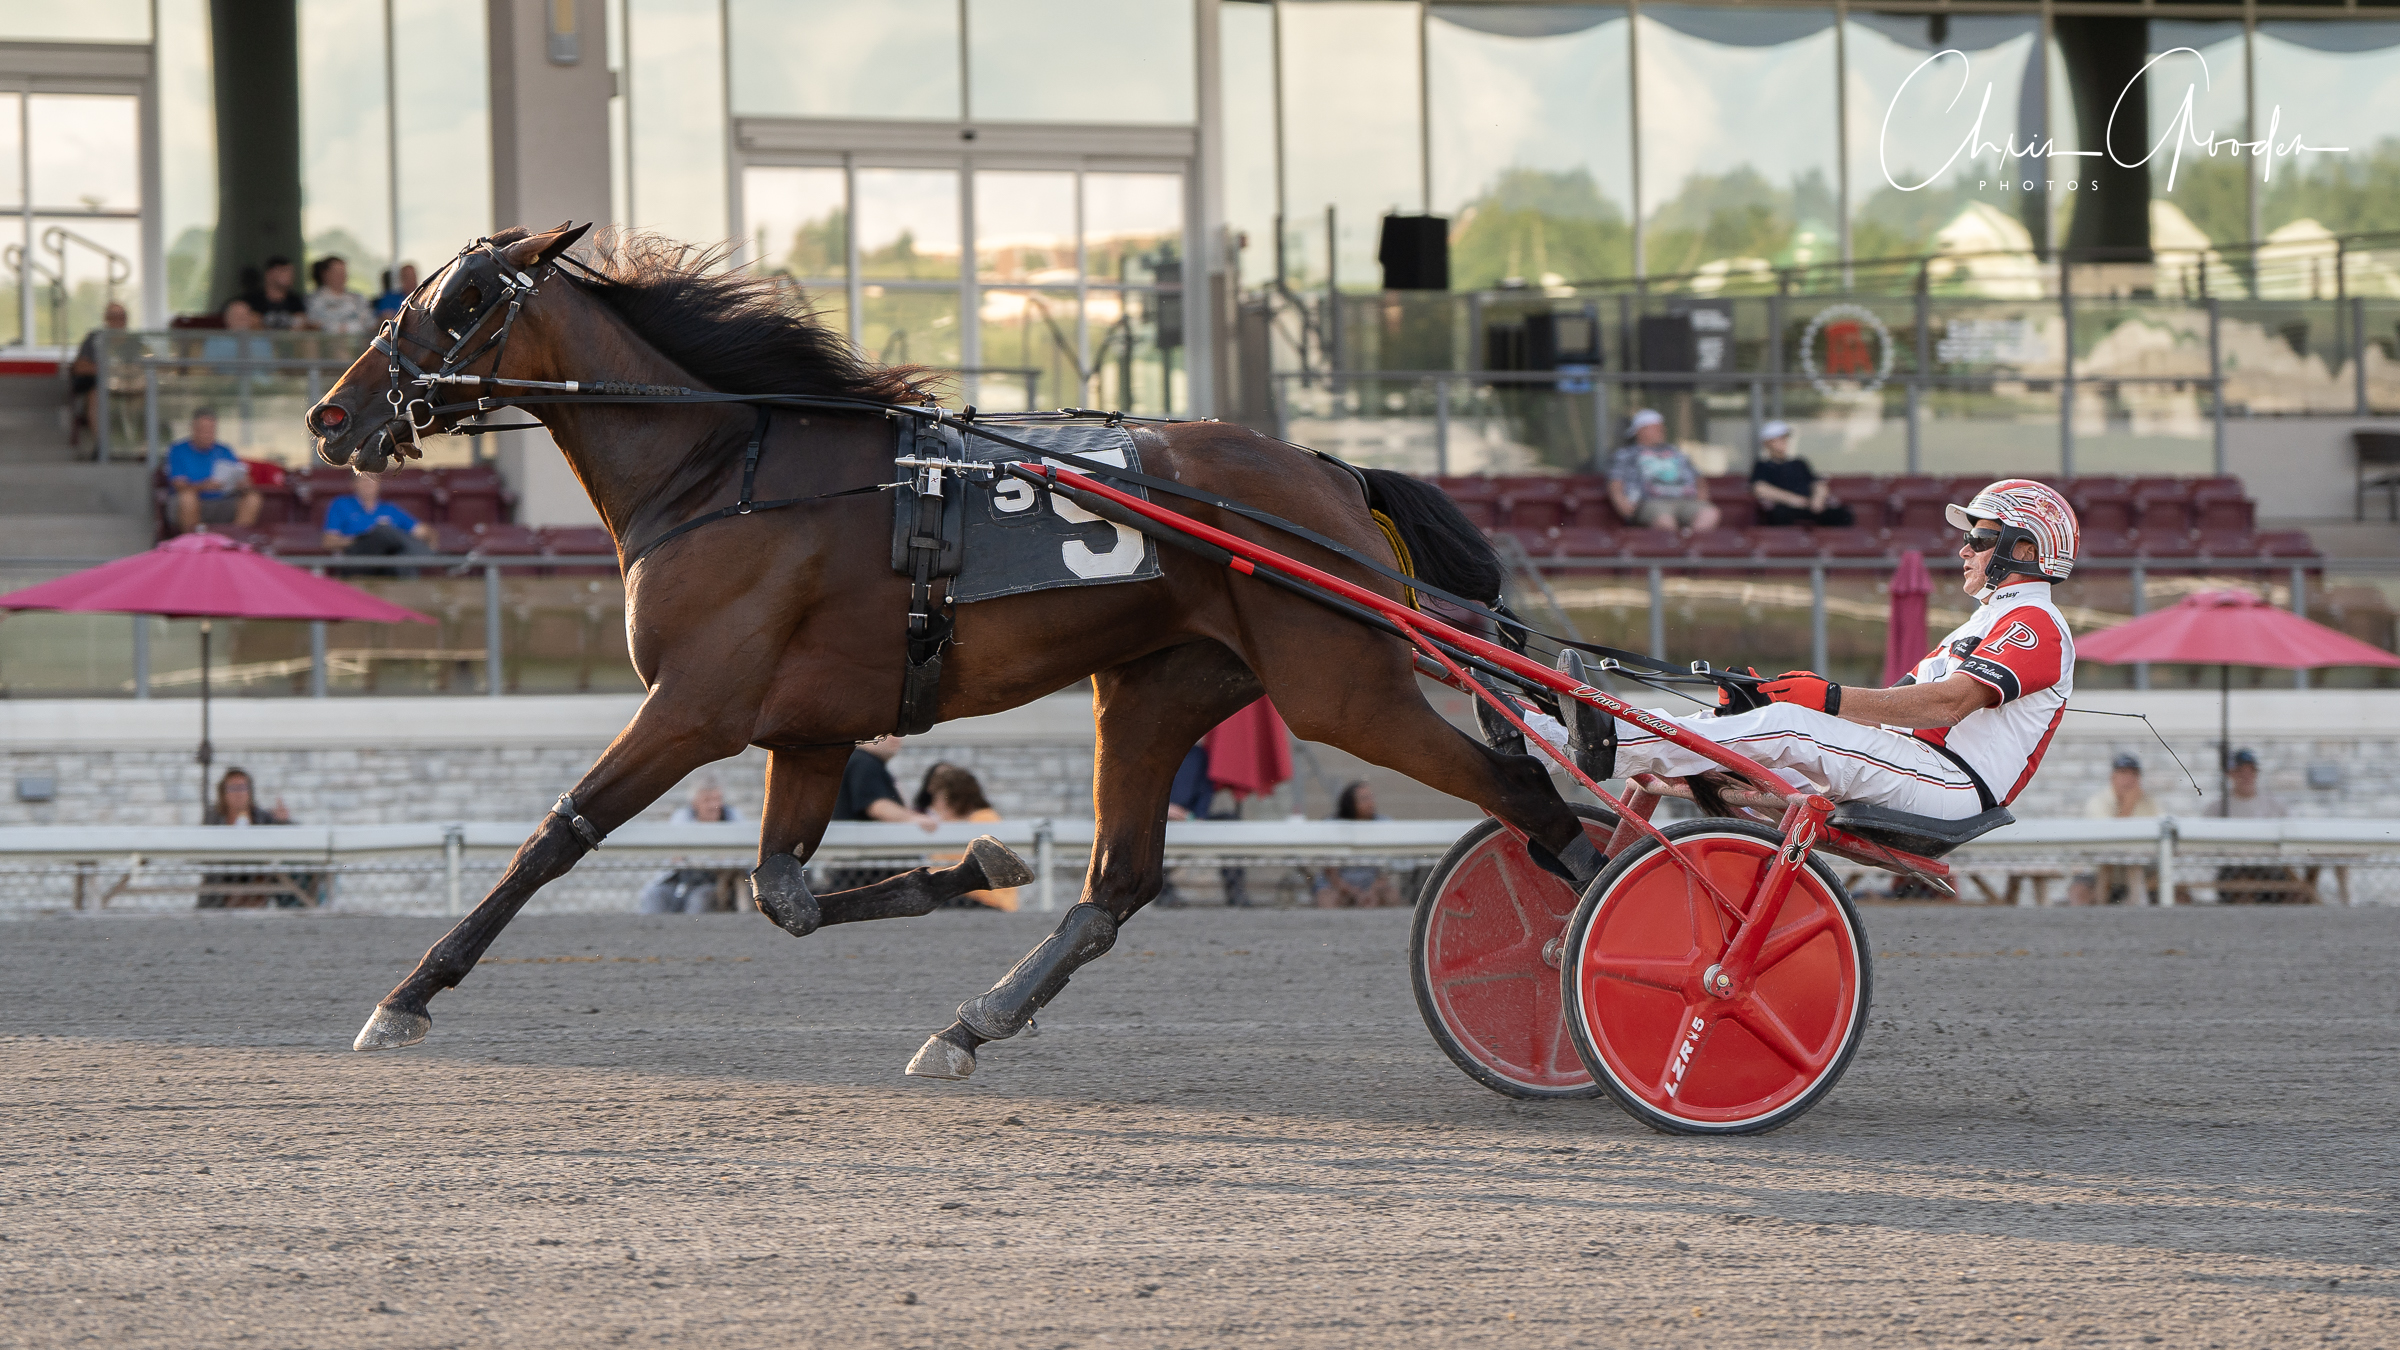 Trotting fillies to battle in $145,196 PASS